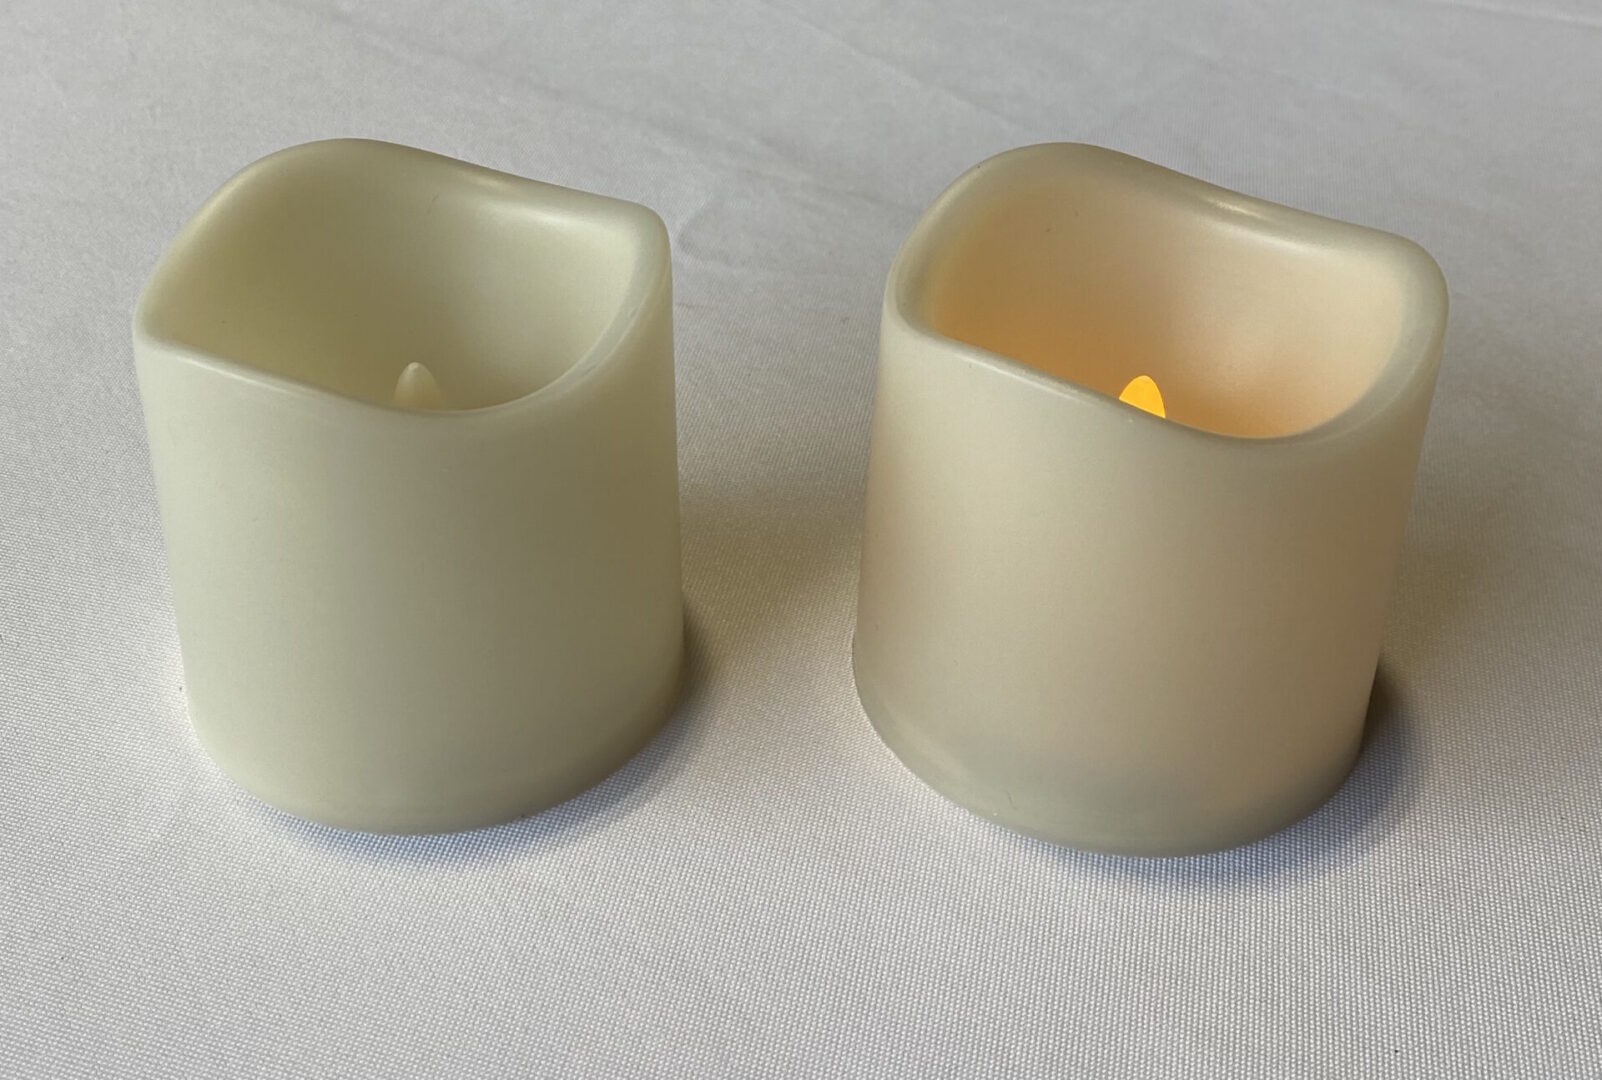 3x3 candles